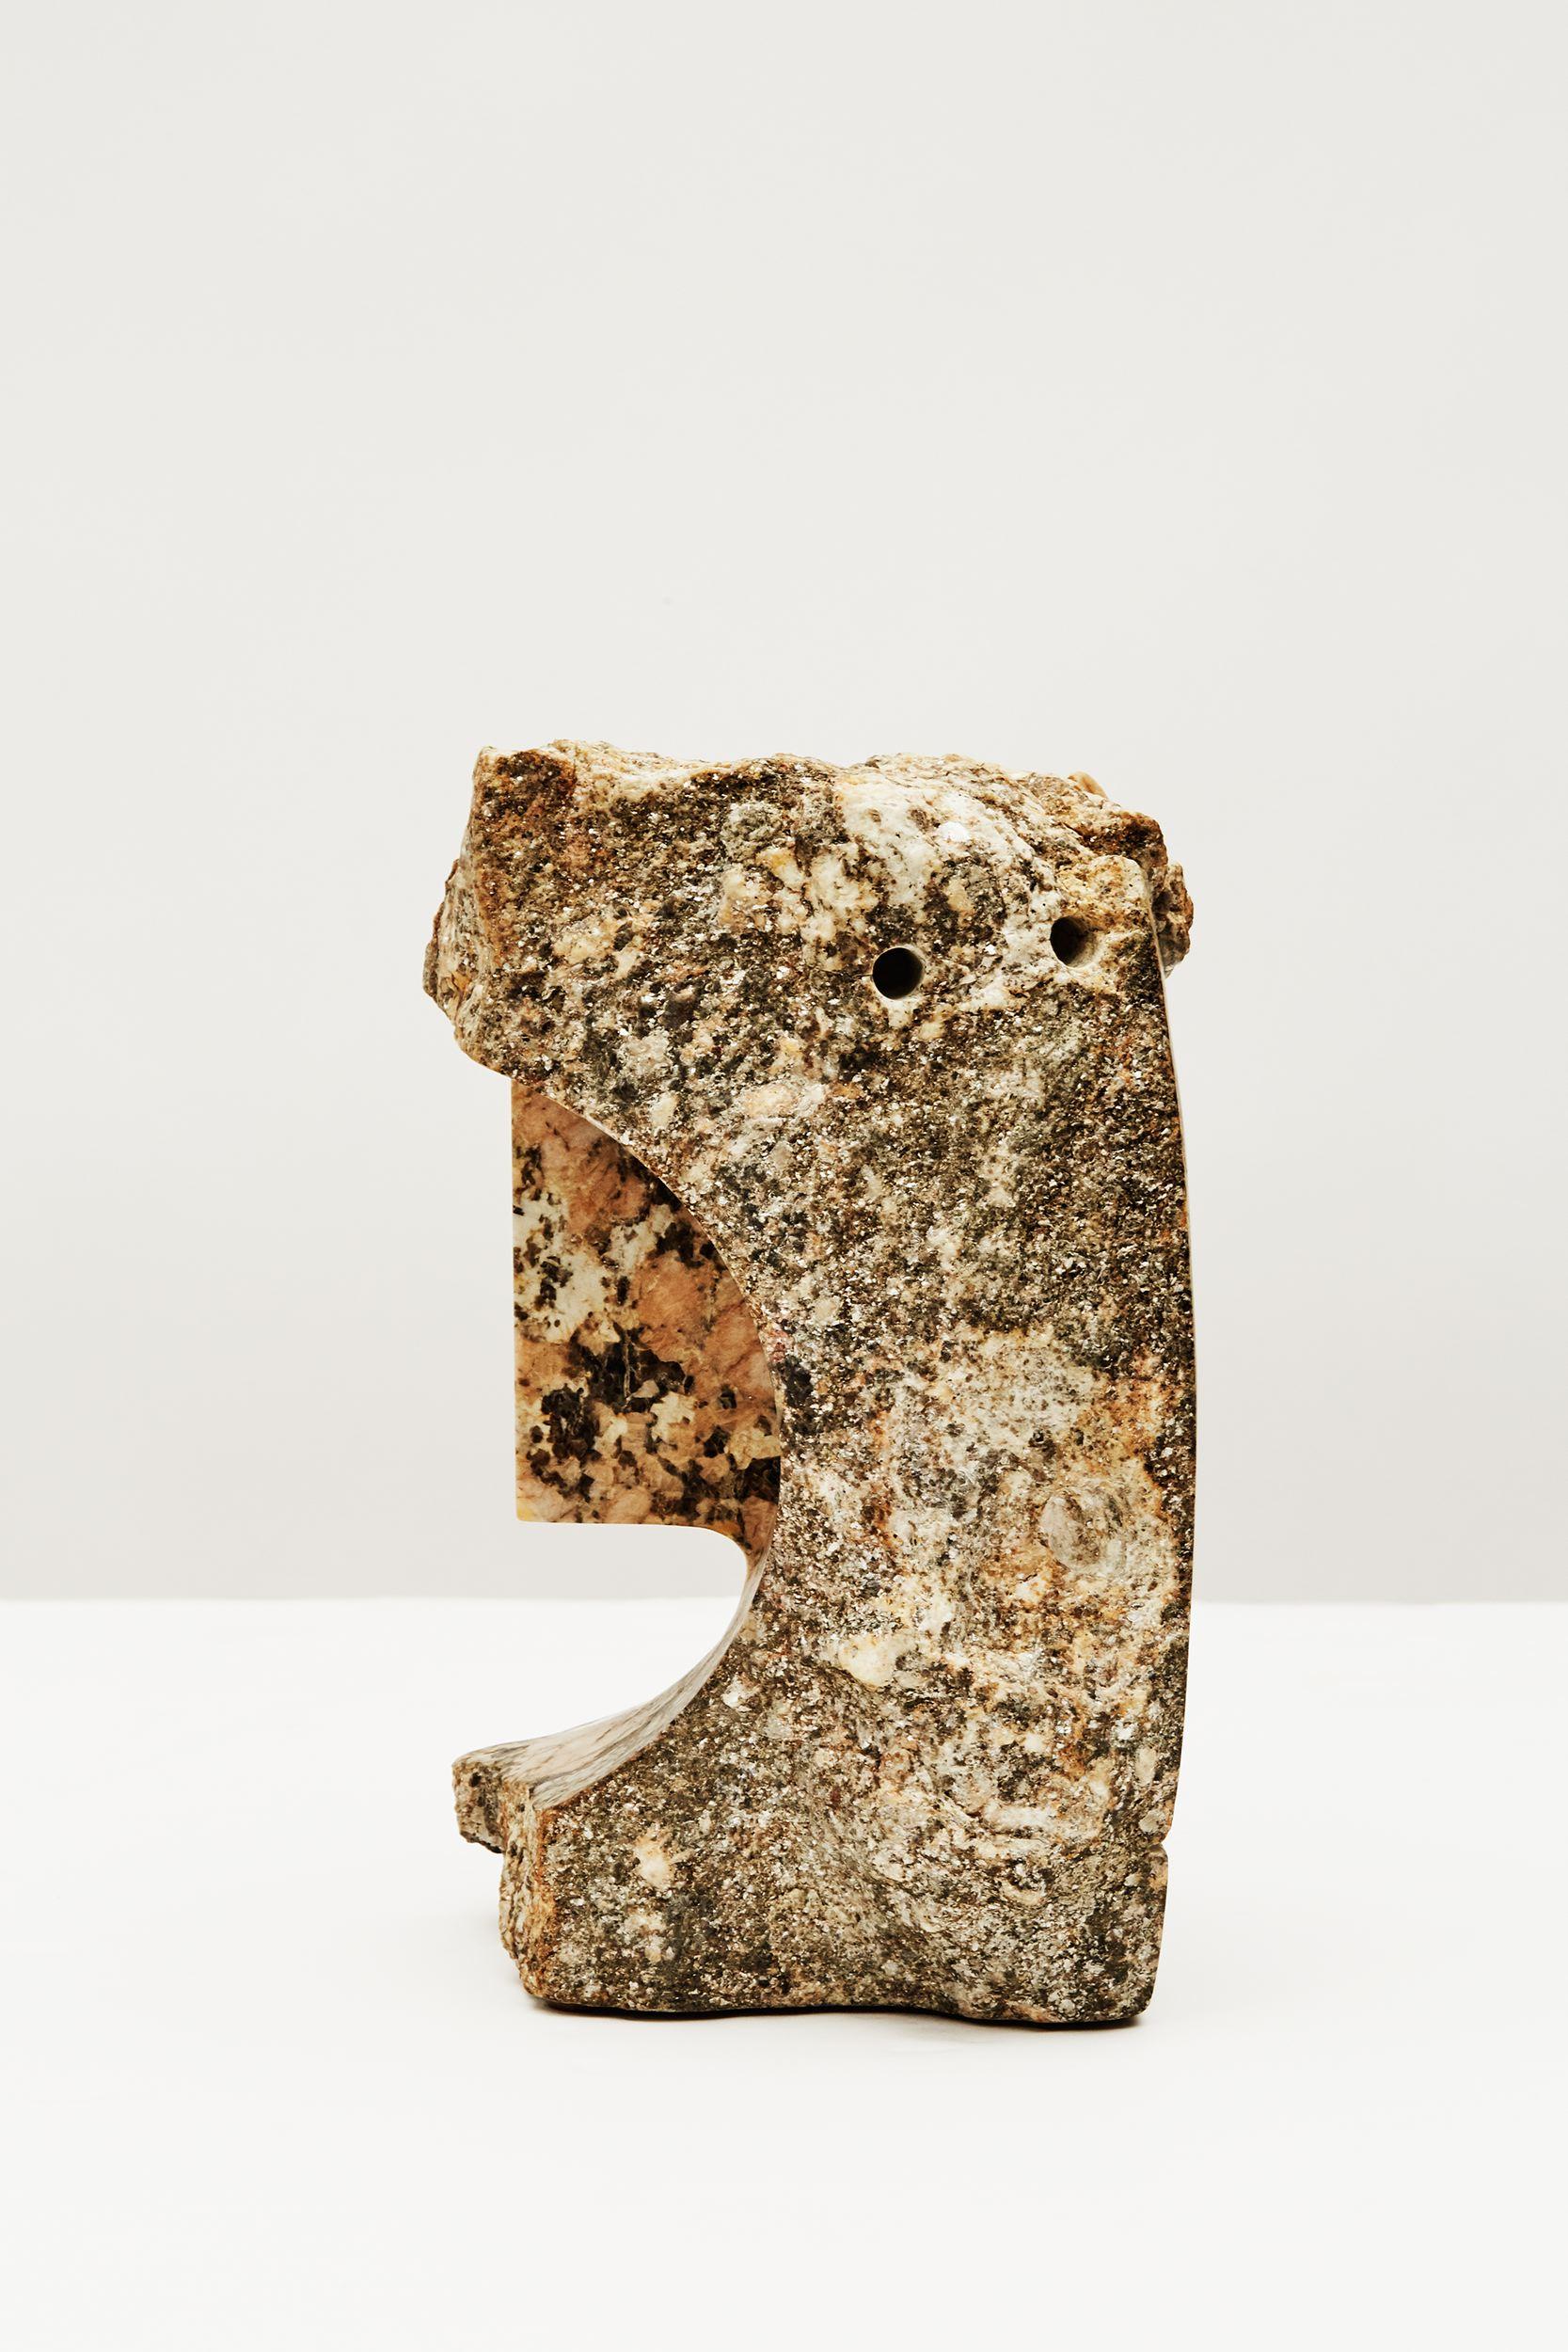 Inscribed: CLF 17
Unique piece.

With L'Etrusco, Italian American artist Cesare Arduini has explored a new stone--Colombo Granite--but has remained true to his search for order and coherence in the chaotic beauty of natural form. In this case, he